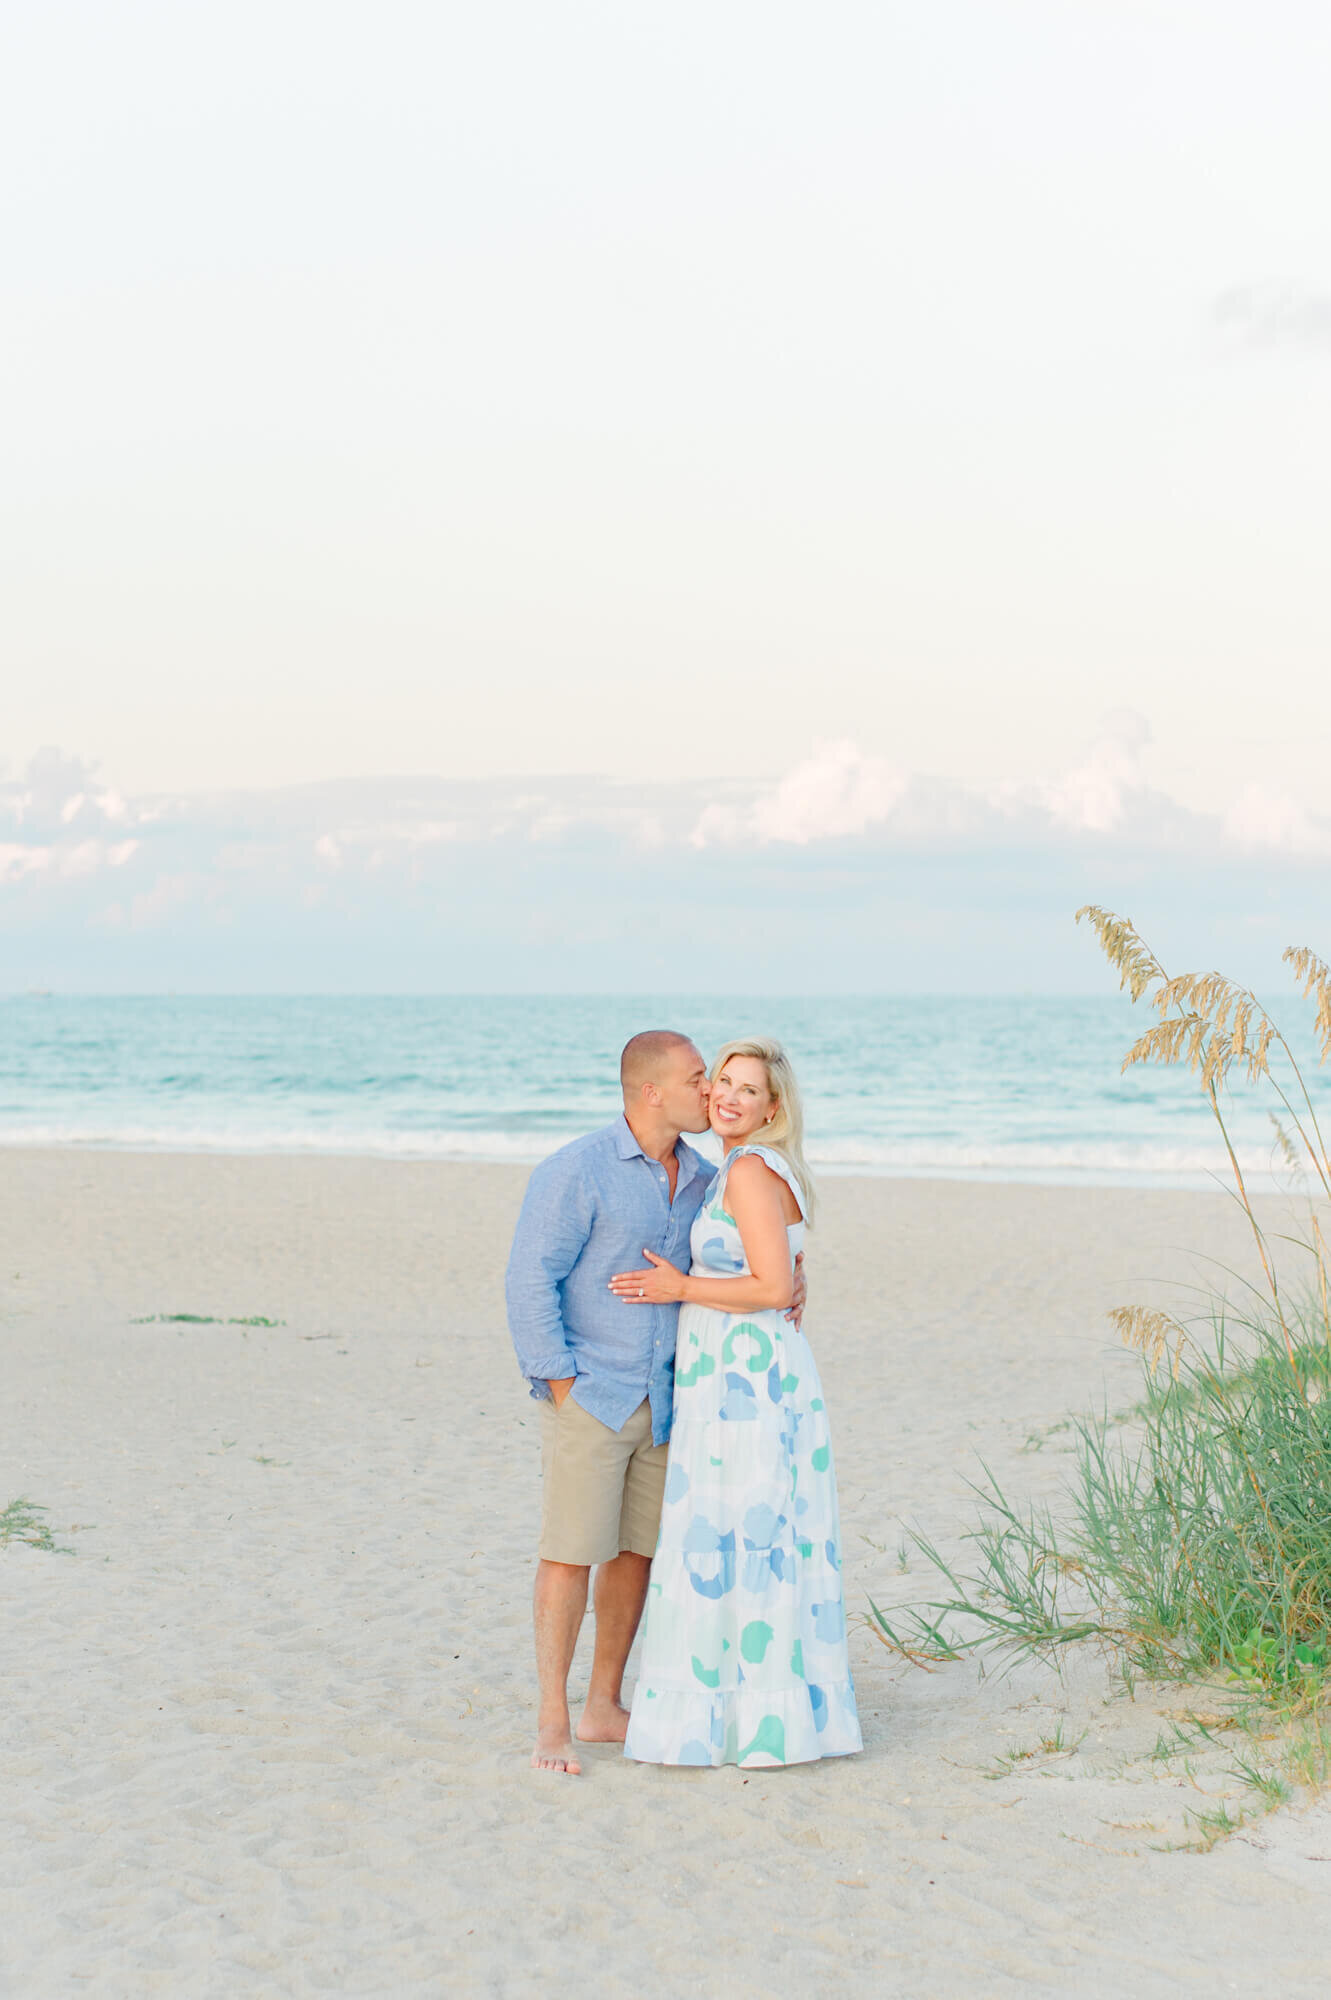 Husband and wife standing on the beach near the dunes and kissing her on the cheek